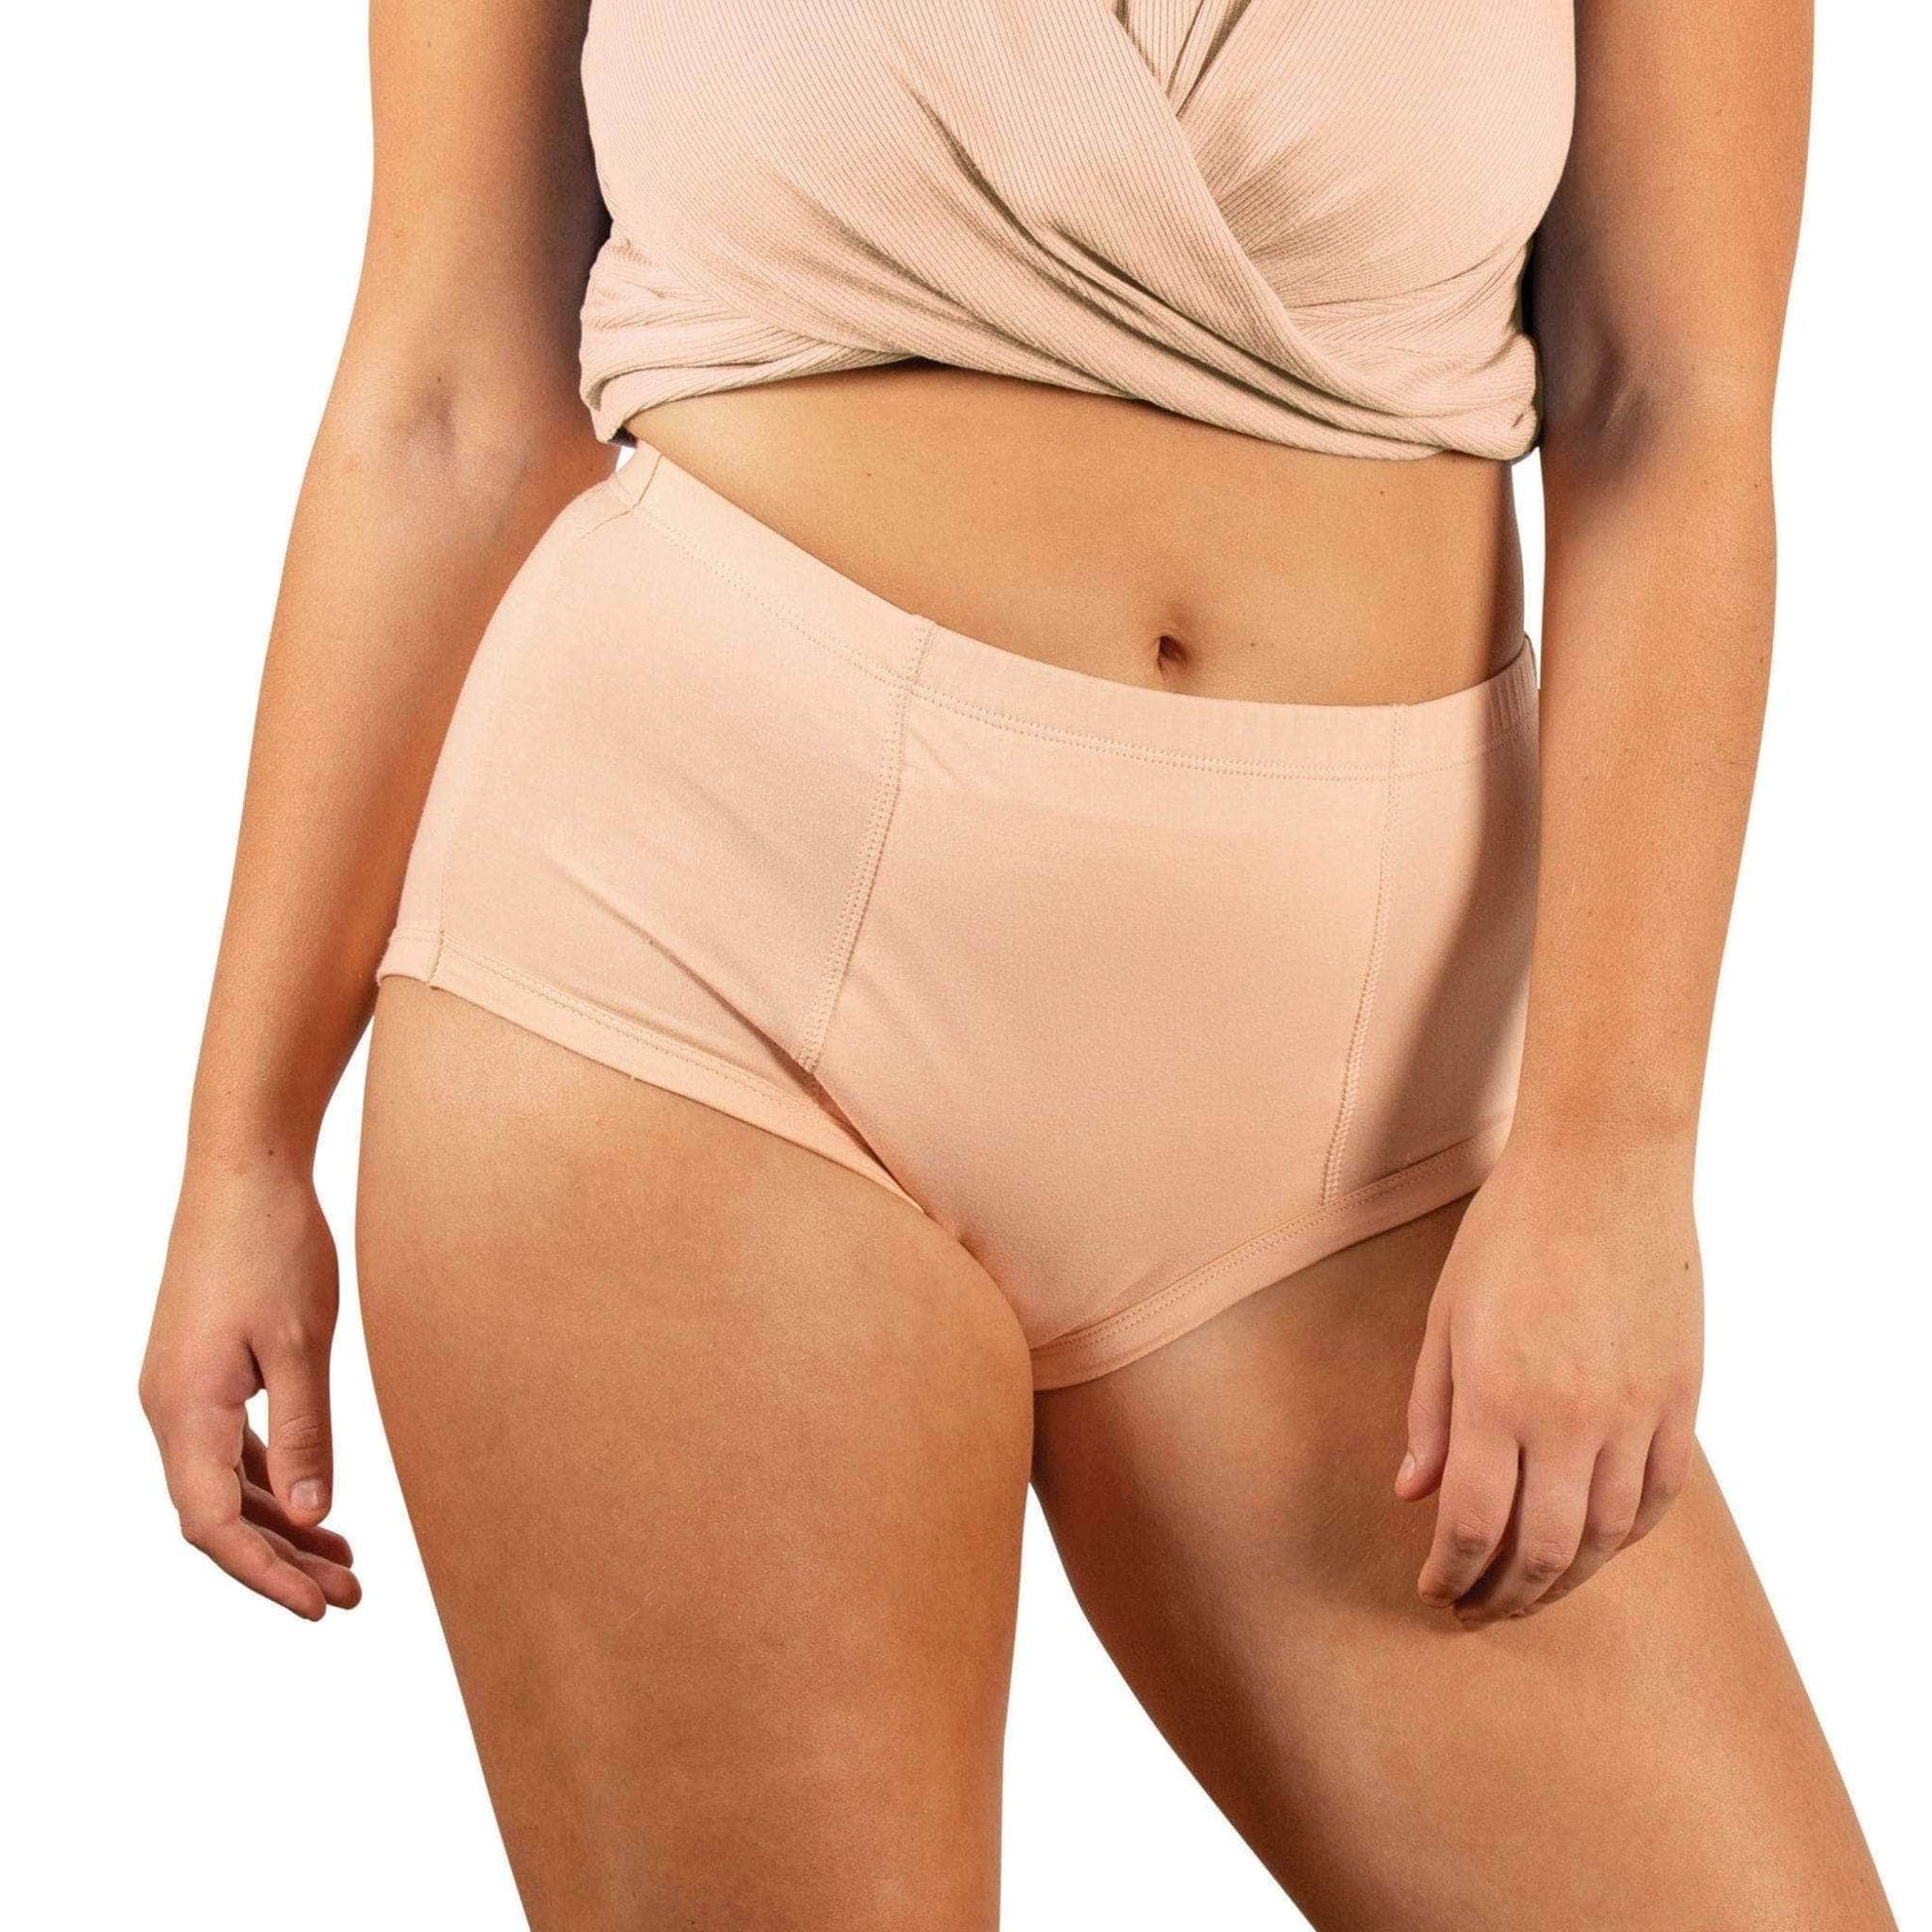 CONNI Women's Classic 5602 Incontinence & Period Underwear - Beige - Sale - Caring Clothing